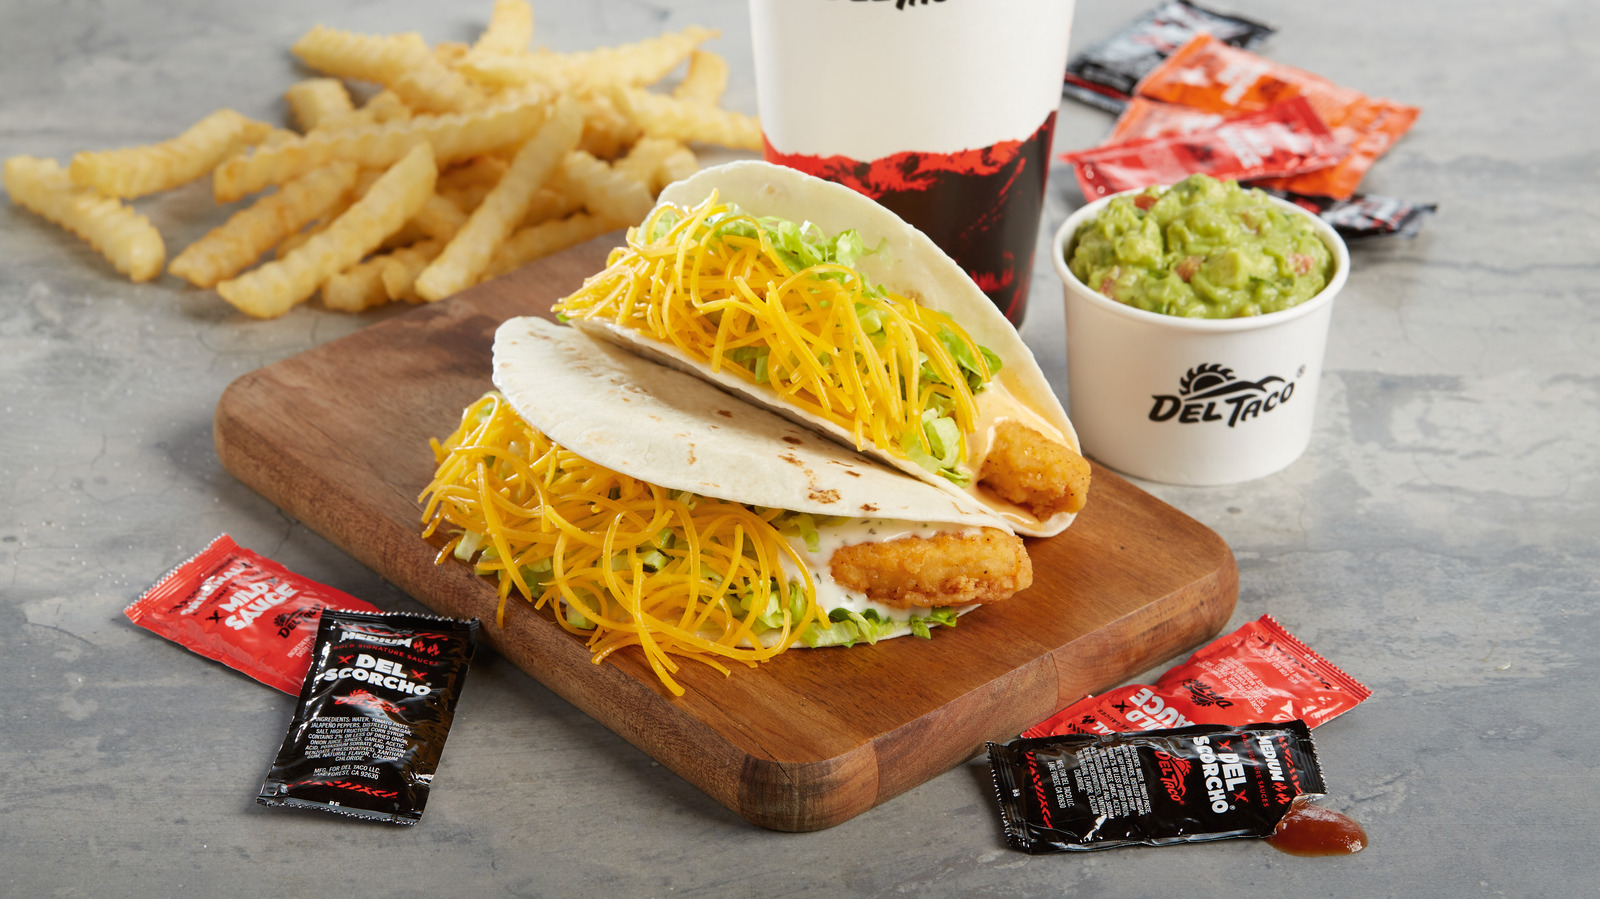 https://www.mashed.com/img/gallery/del-taco-wants-to-add-some-crispiness-to-your-week-with-a-national-drive-thru-day-deal/l-intro-1658776687.jpg